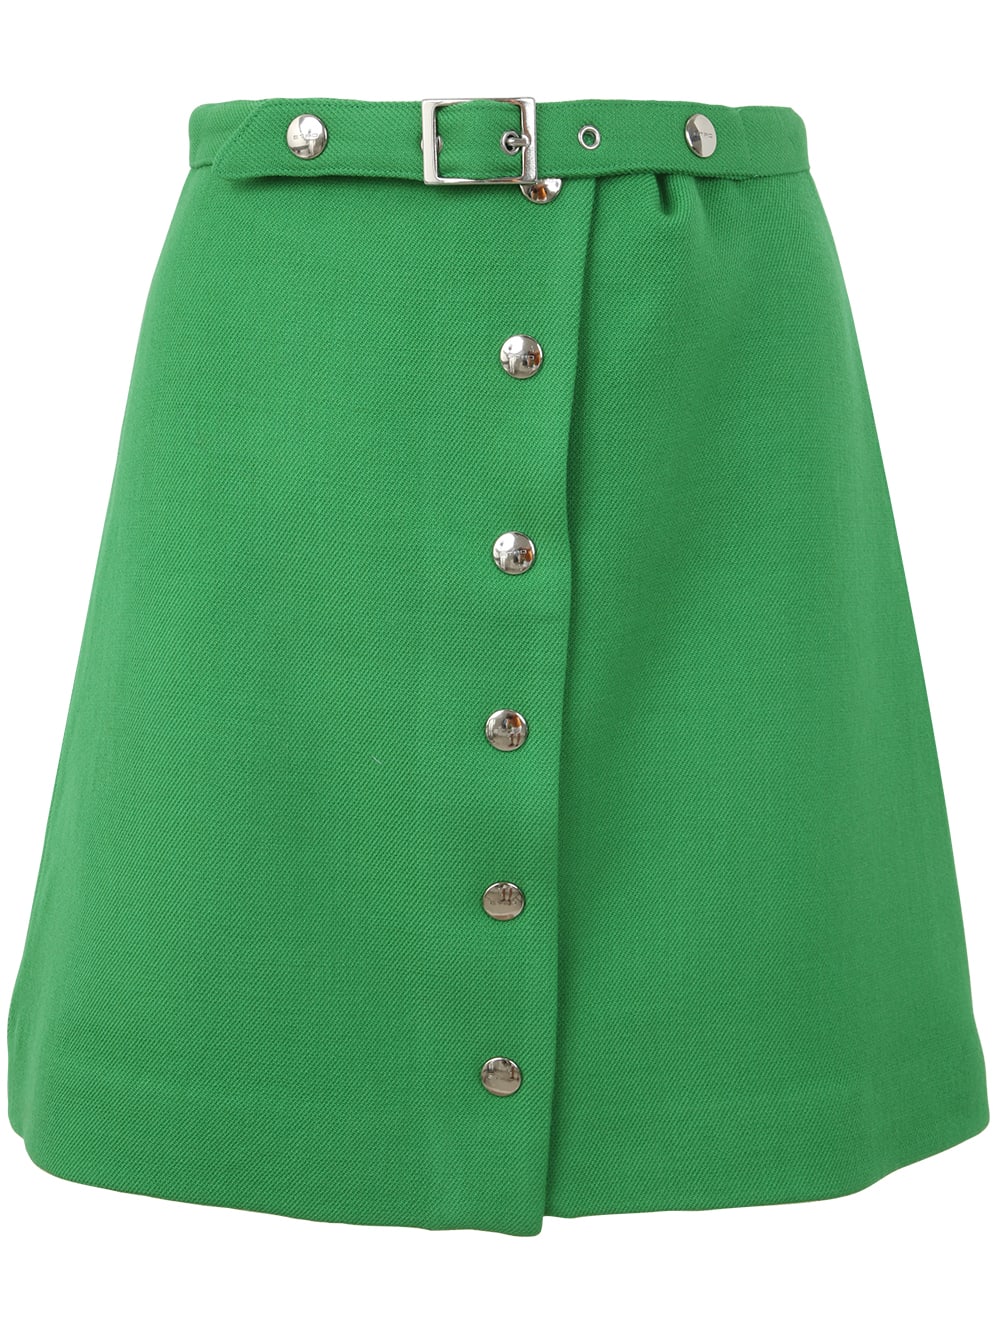 ETRO MINI SKIRT WITH BUTTONS IN FRONT